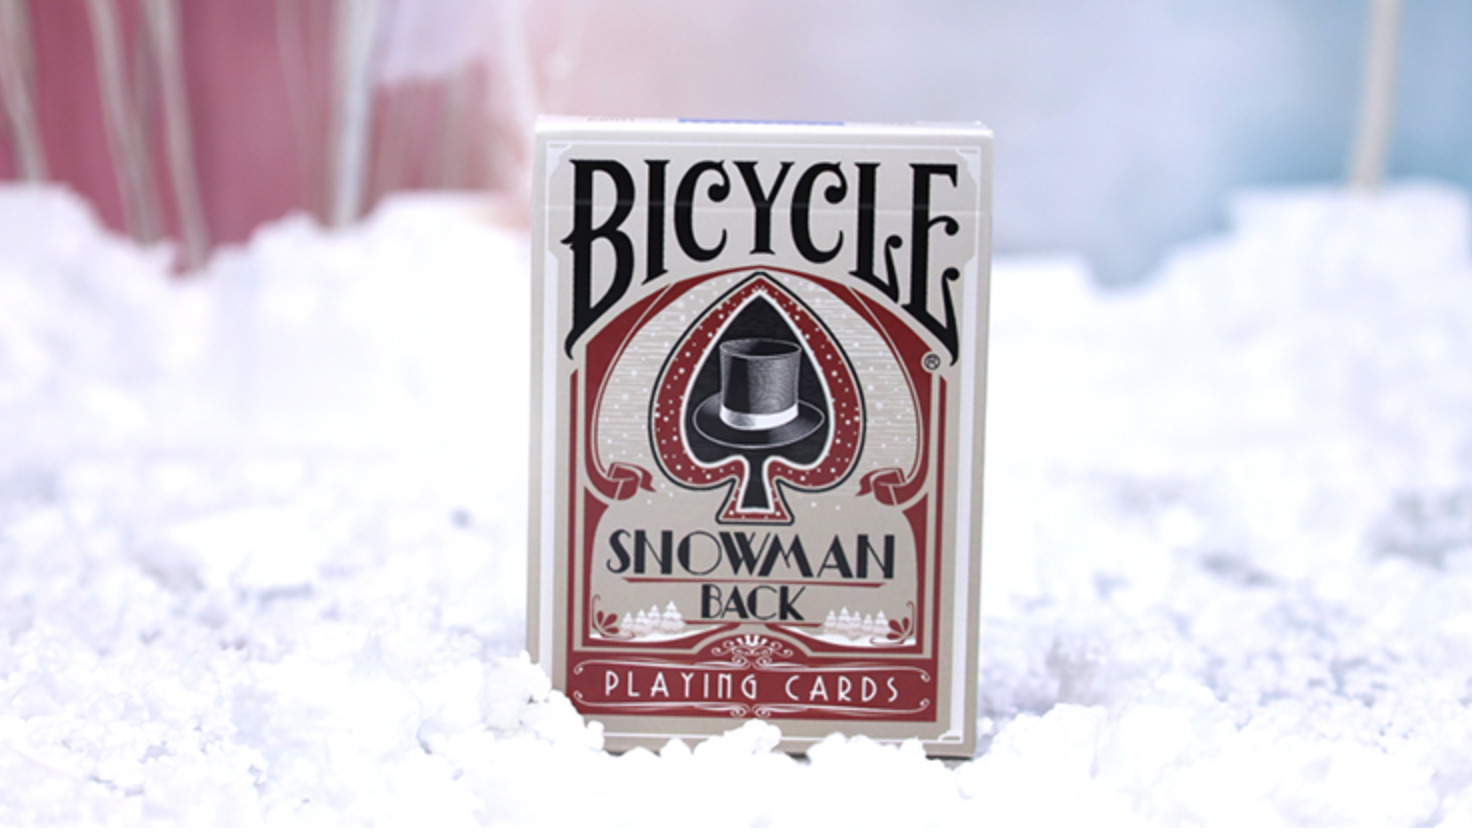 Bicycle Snowman Back Playing Cards Red Deck SEALED